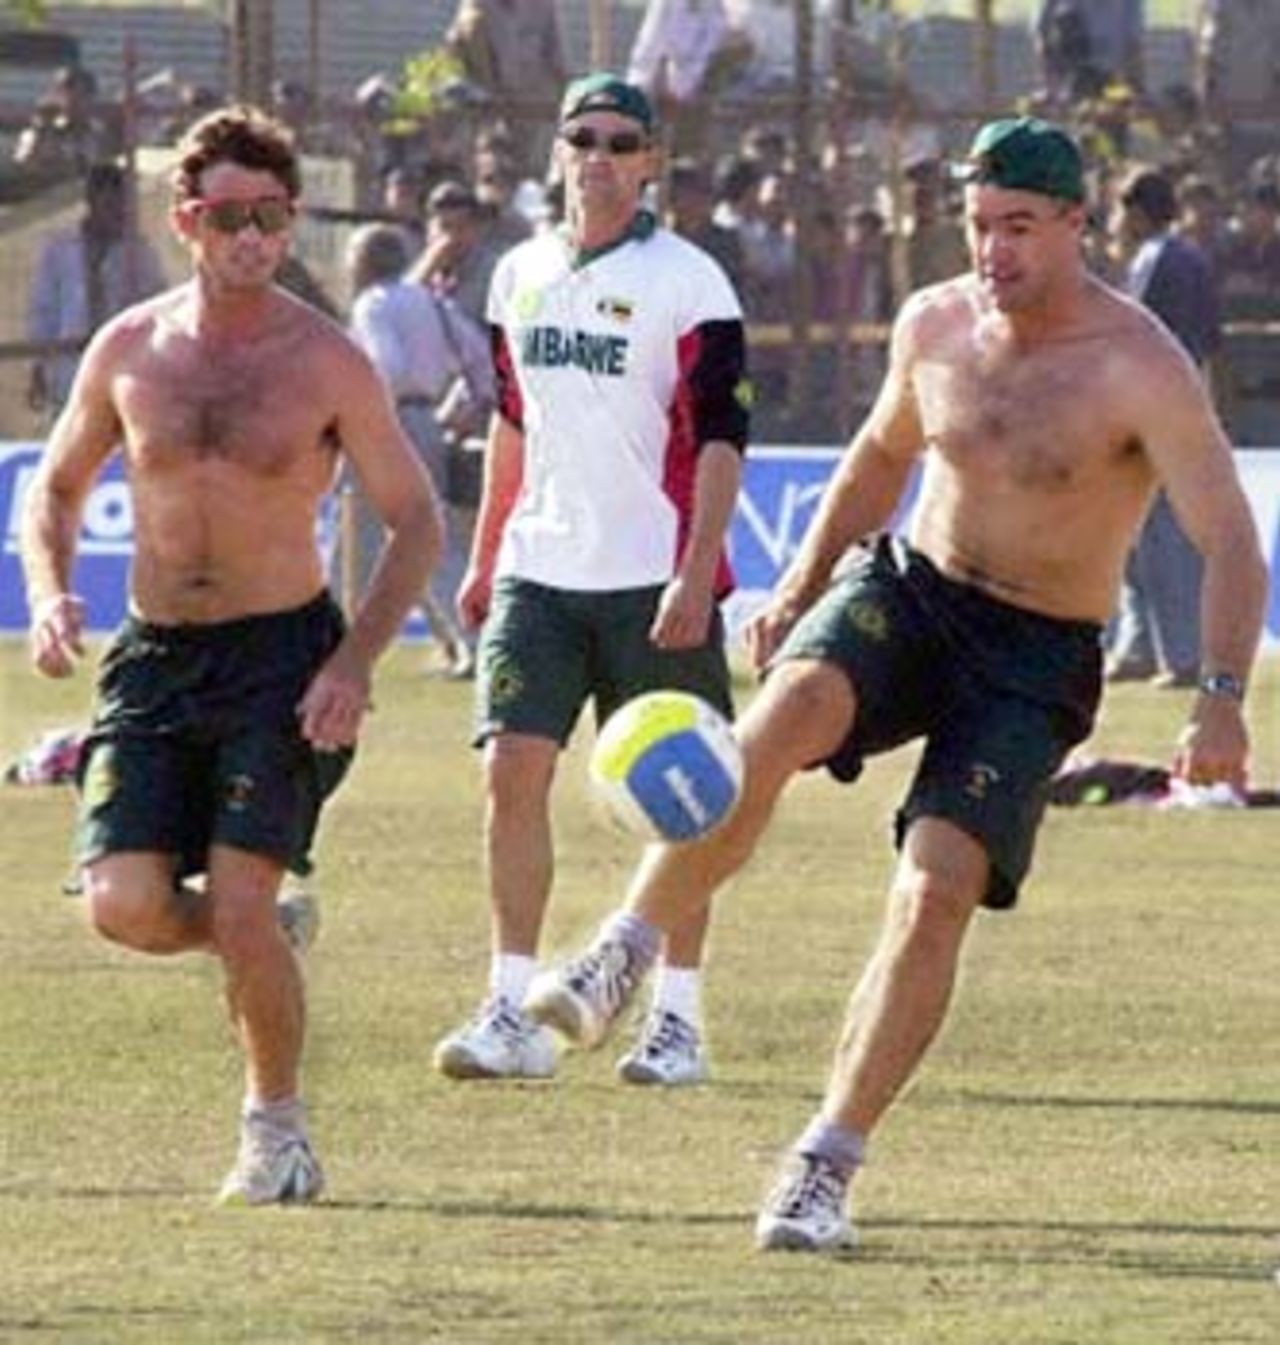 Zimbabwe cricket team skipper Heath Streak (R) plays football with team member Guy Whittall (L) during practice 13 December 2000, ahead of the final one-day International cricket match against India at the Municipal cricket stadium at Rajkot. India leads with an insurmountable 3-1 ahead of the 14 December final Test. Man at center is unidentified.